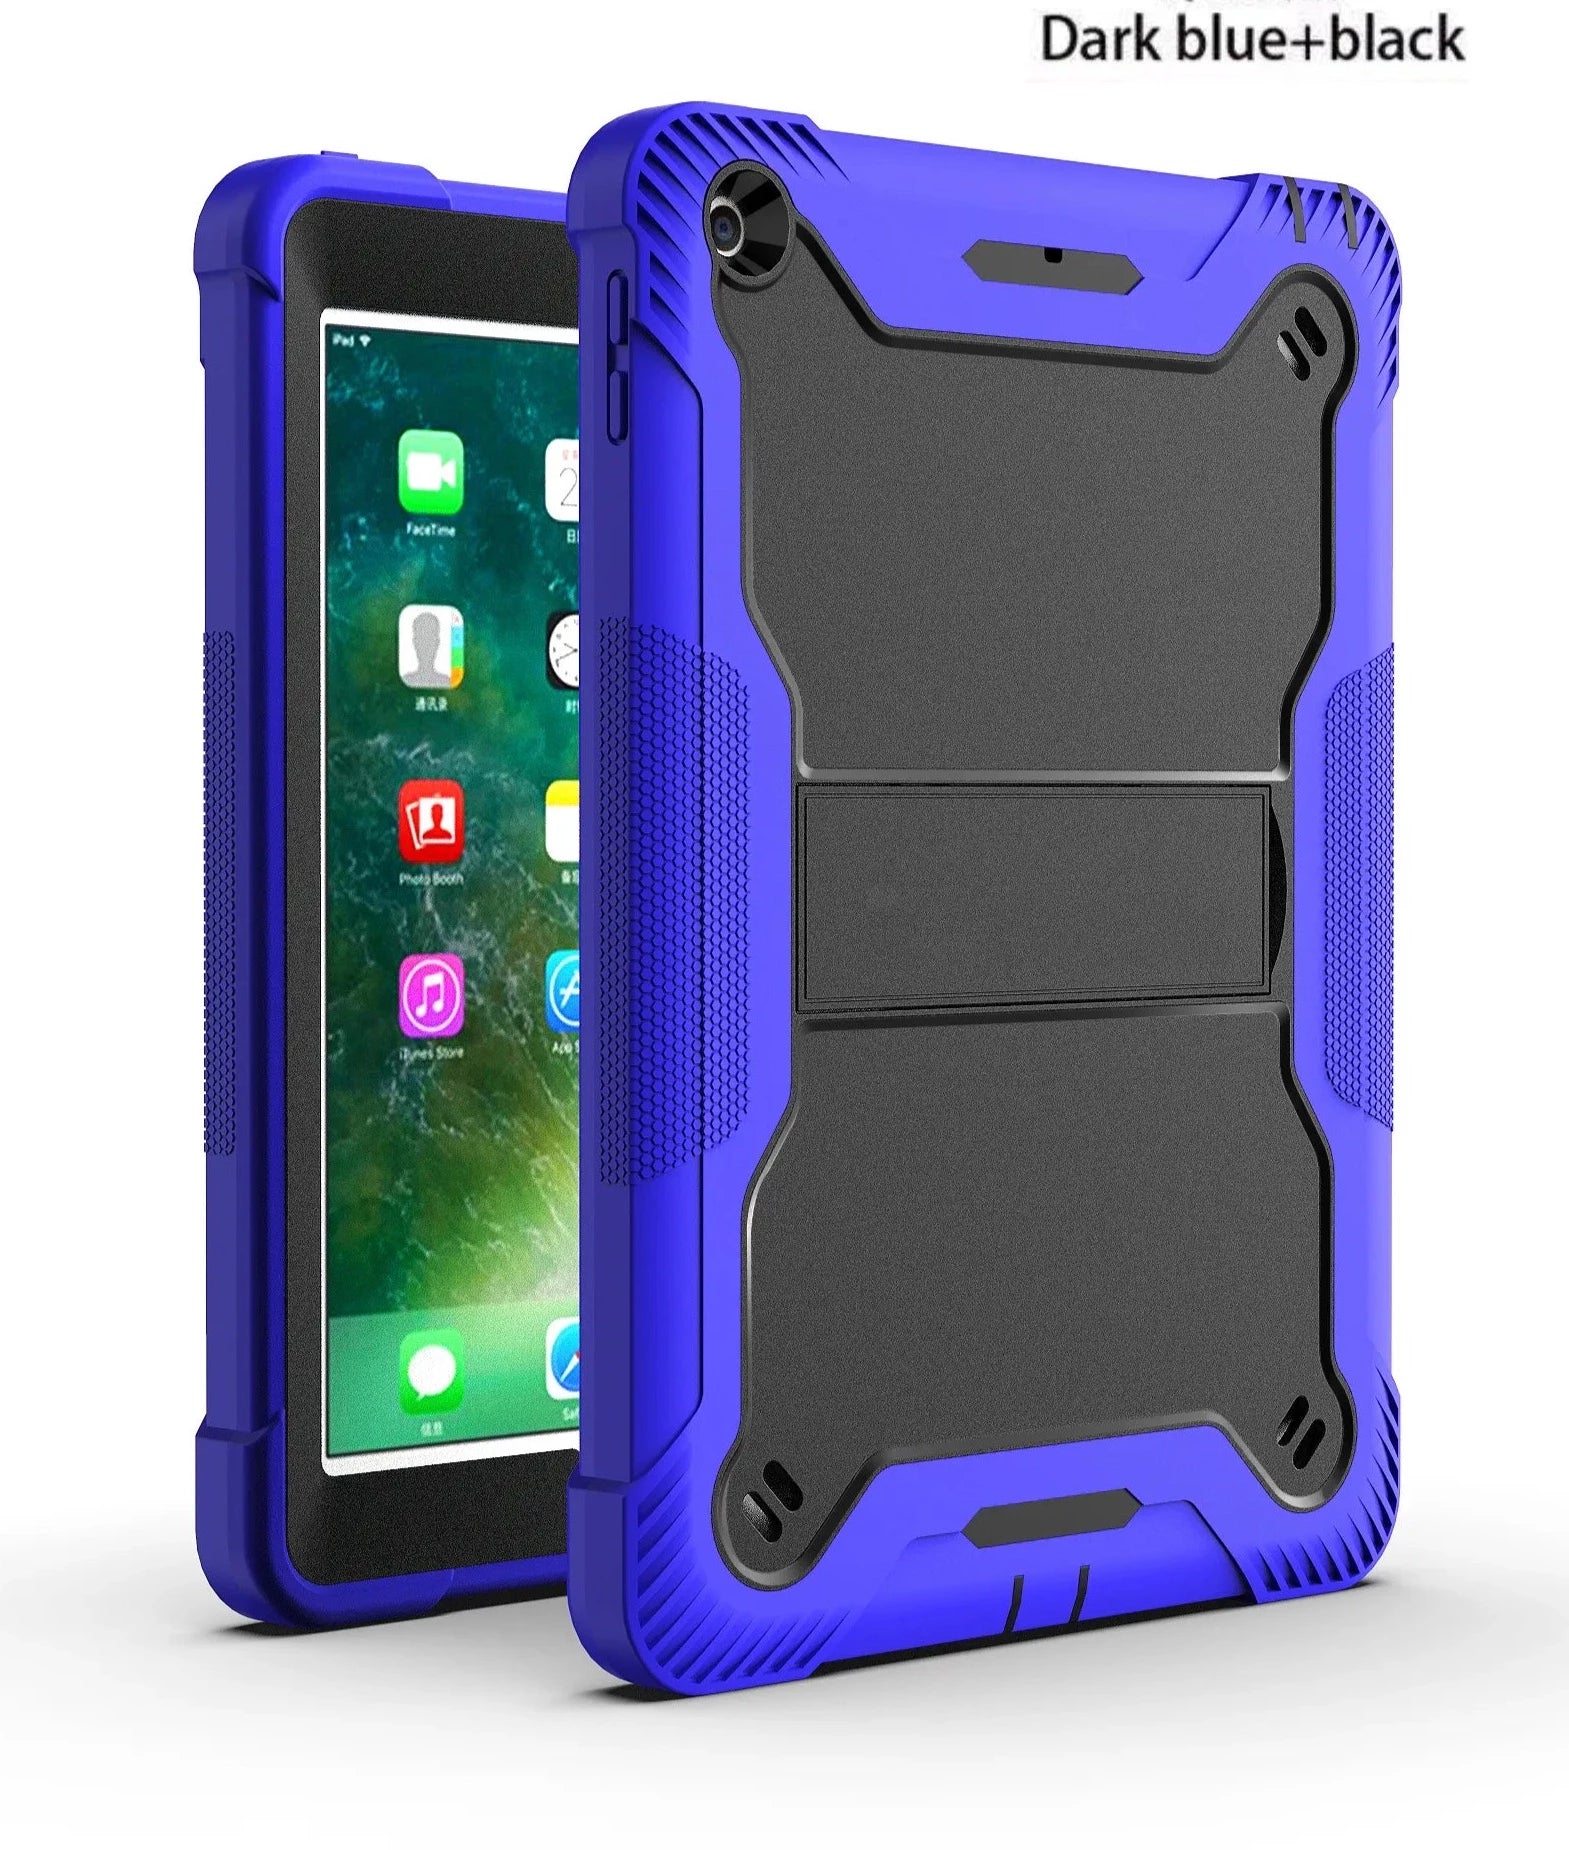 Apple iPad 5, 6, Air 2 (9.7 inch) Blue Shockproof Rugged Case with Kickstand